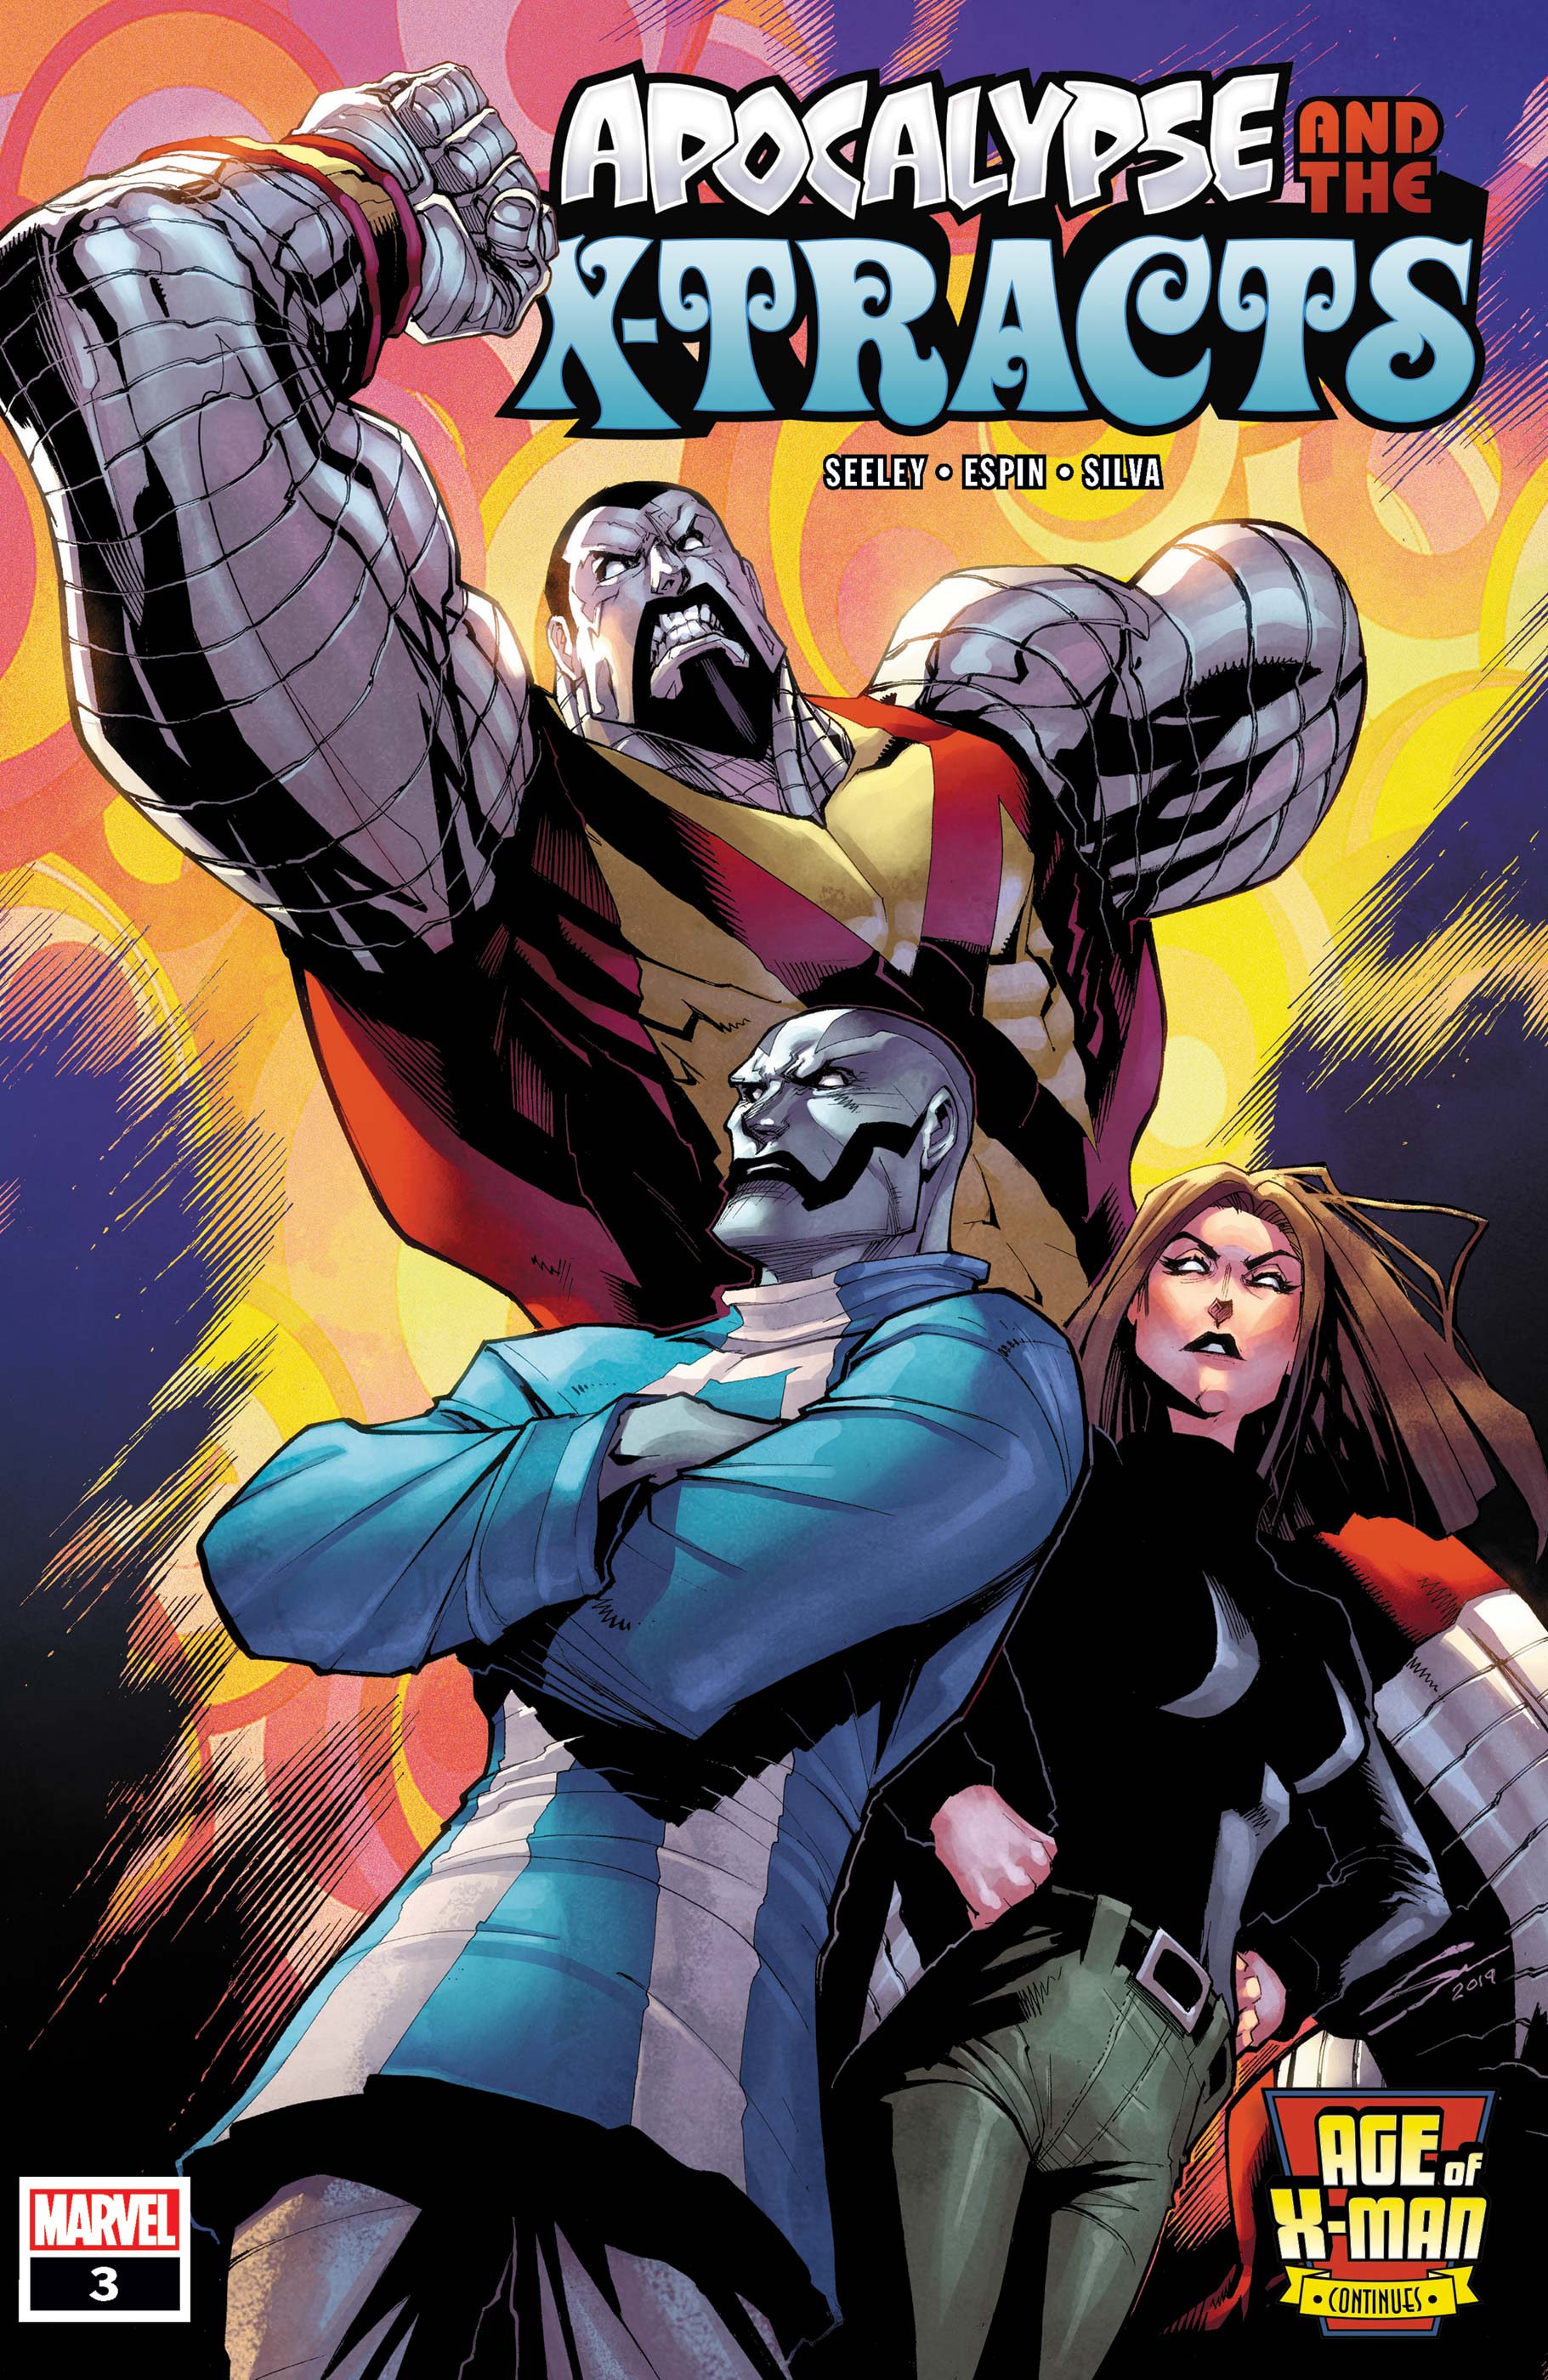 Age of X-Man: Apocalypse & the X-Tracts (2019) #3